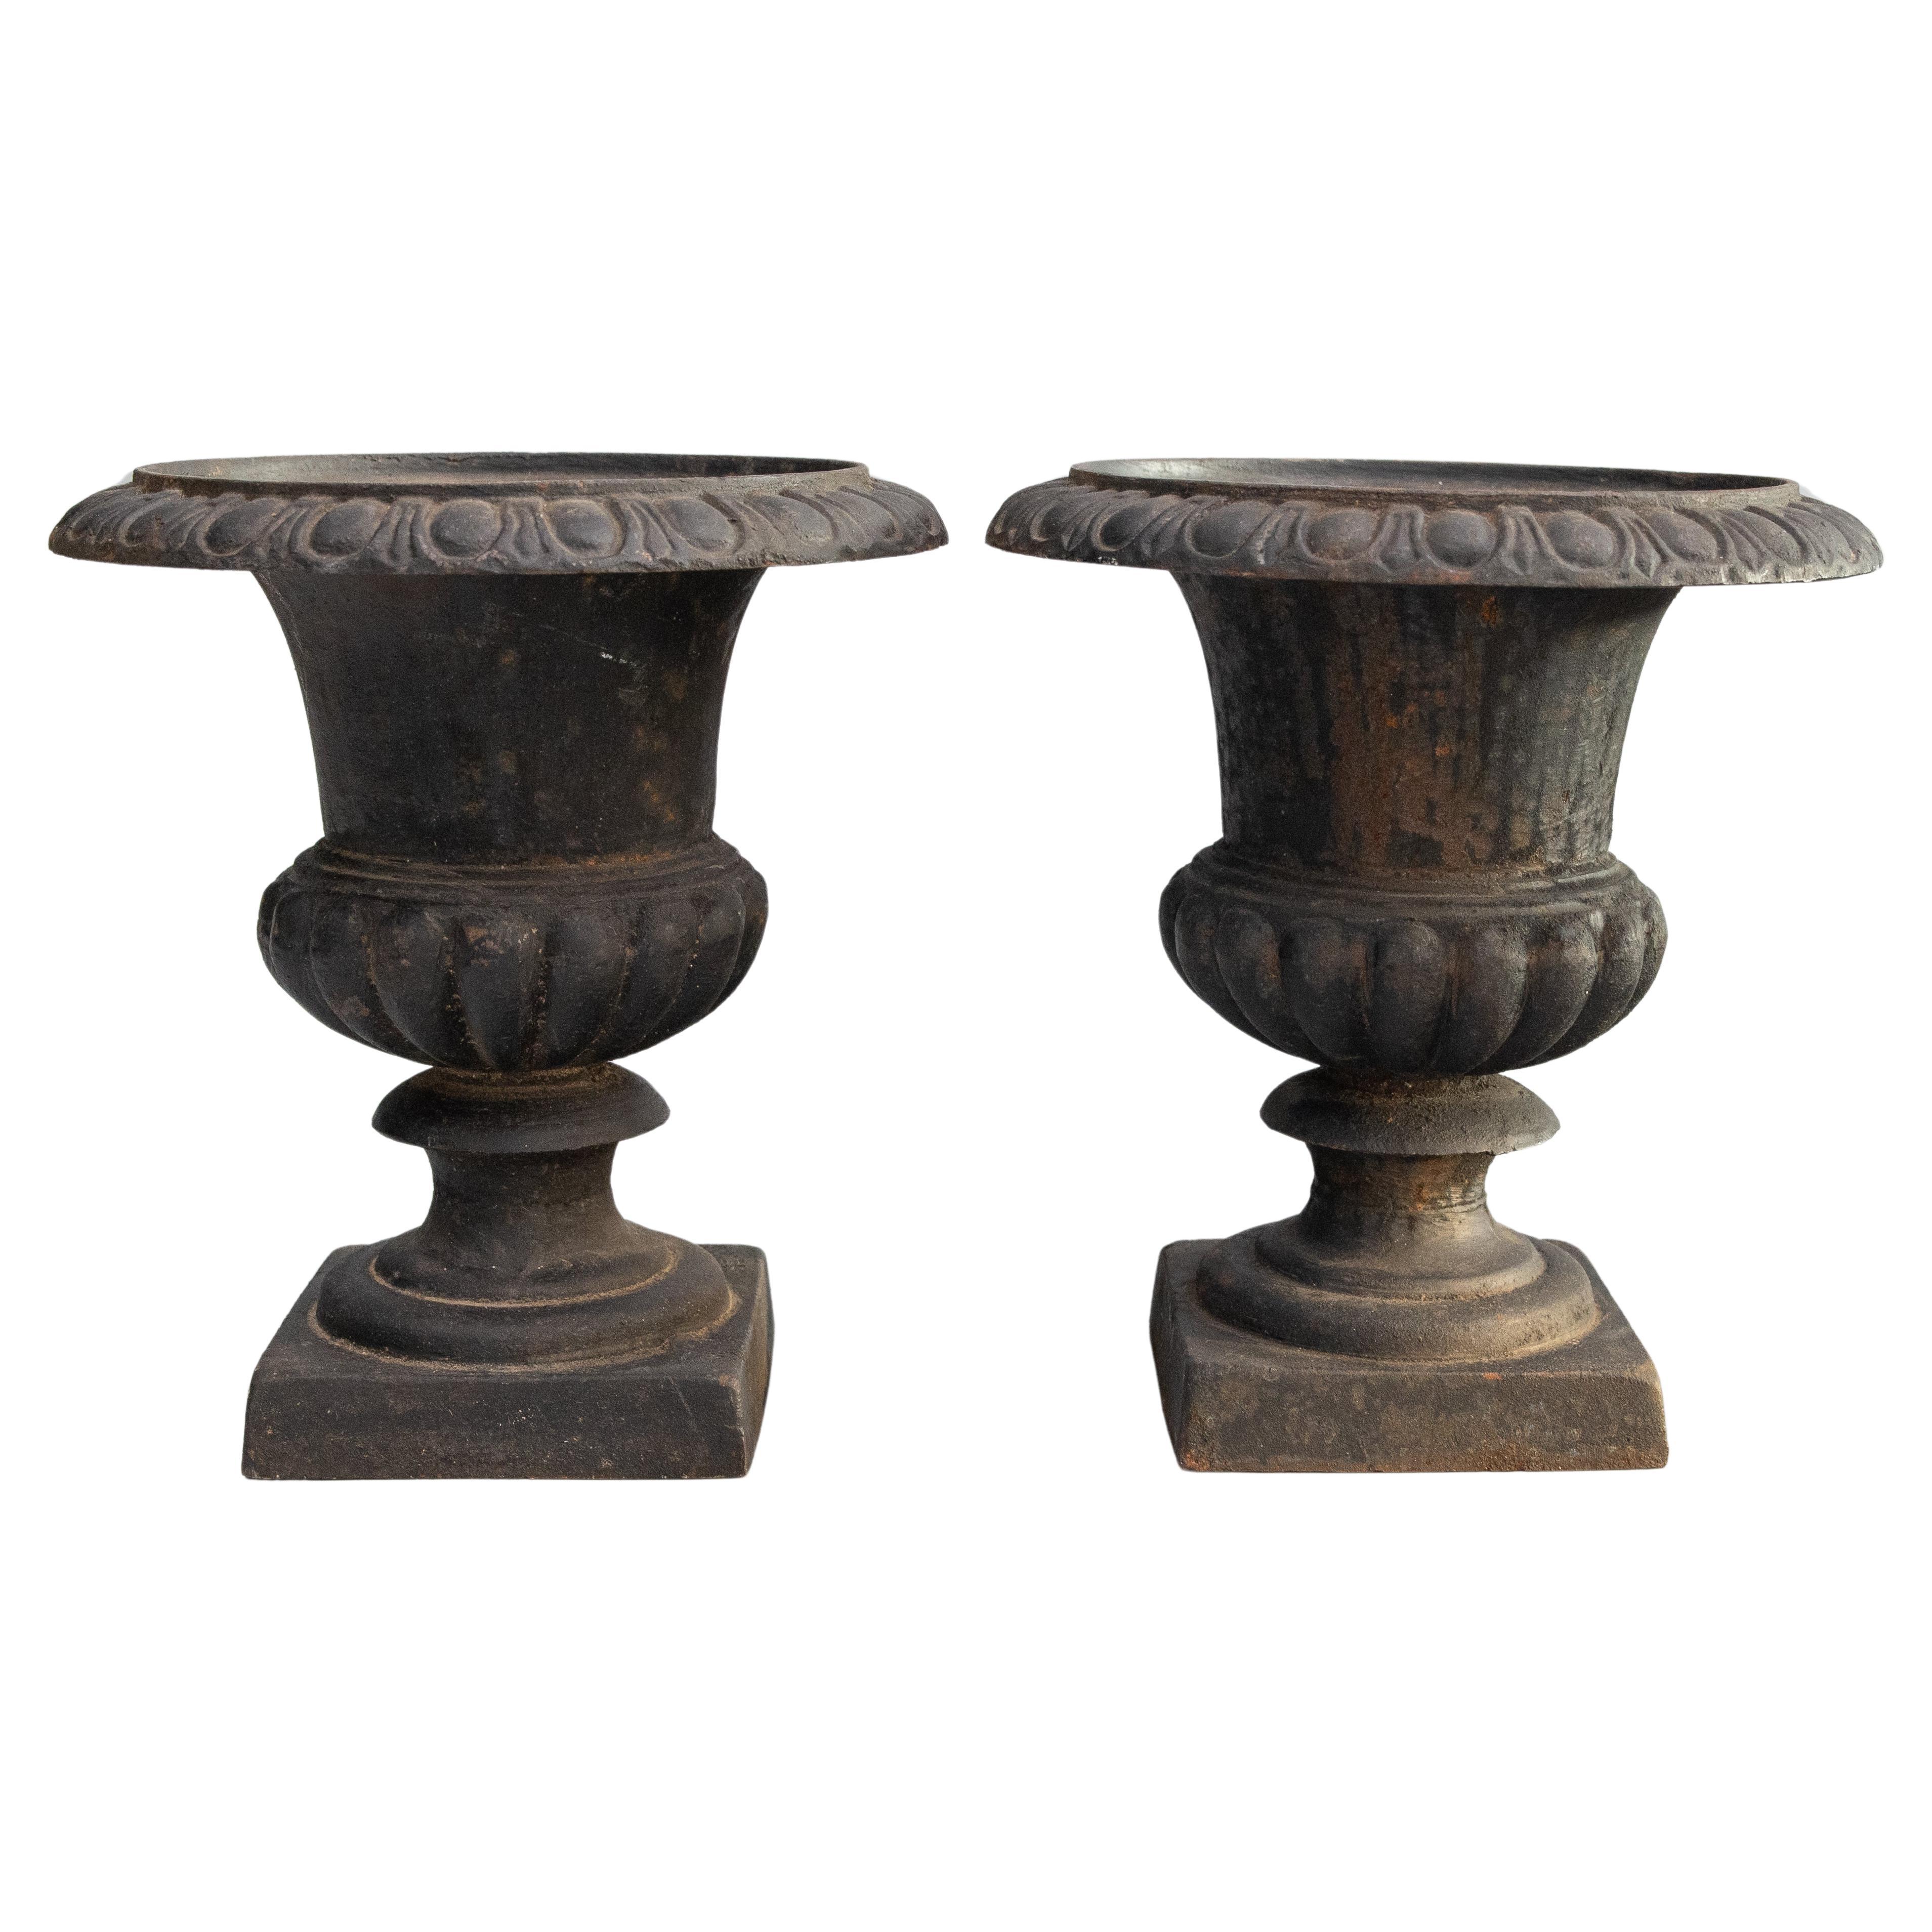 Pair of Early 20th Century French Cast Iron Garden Urns Planters